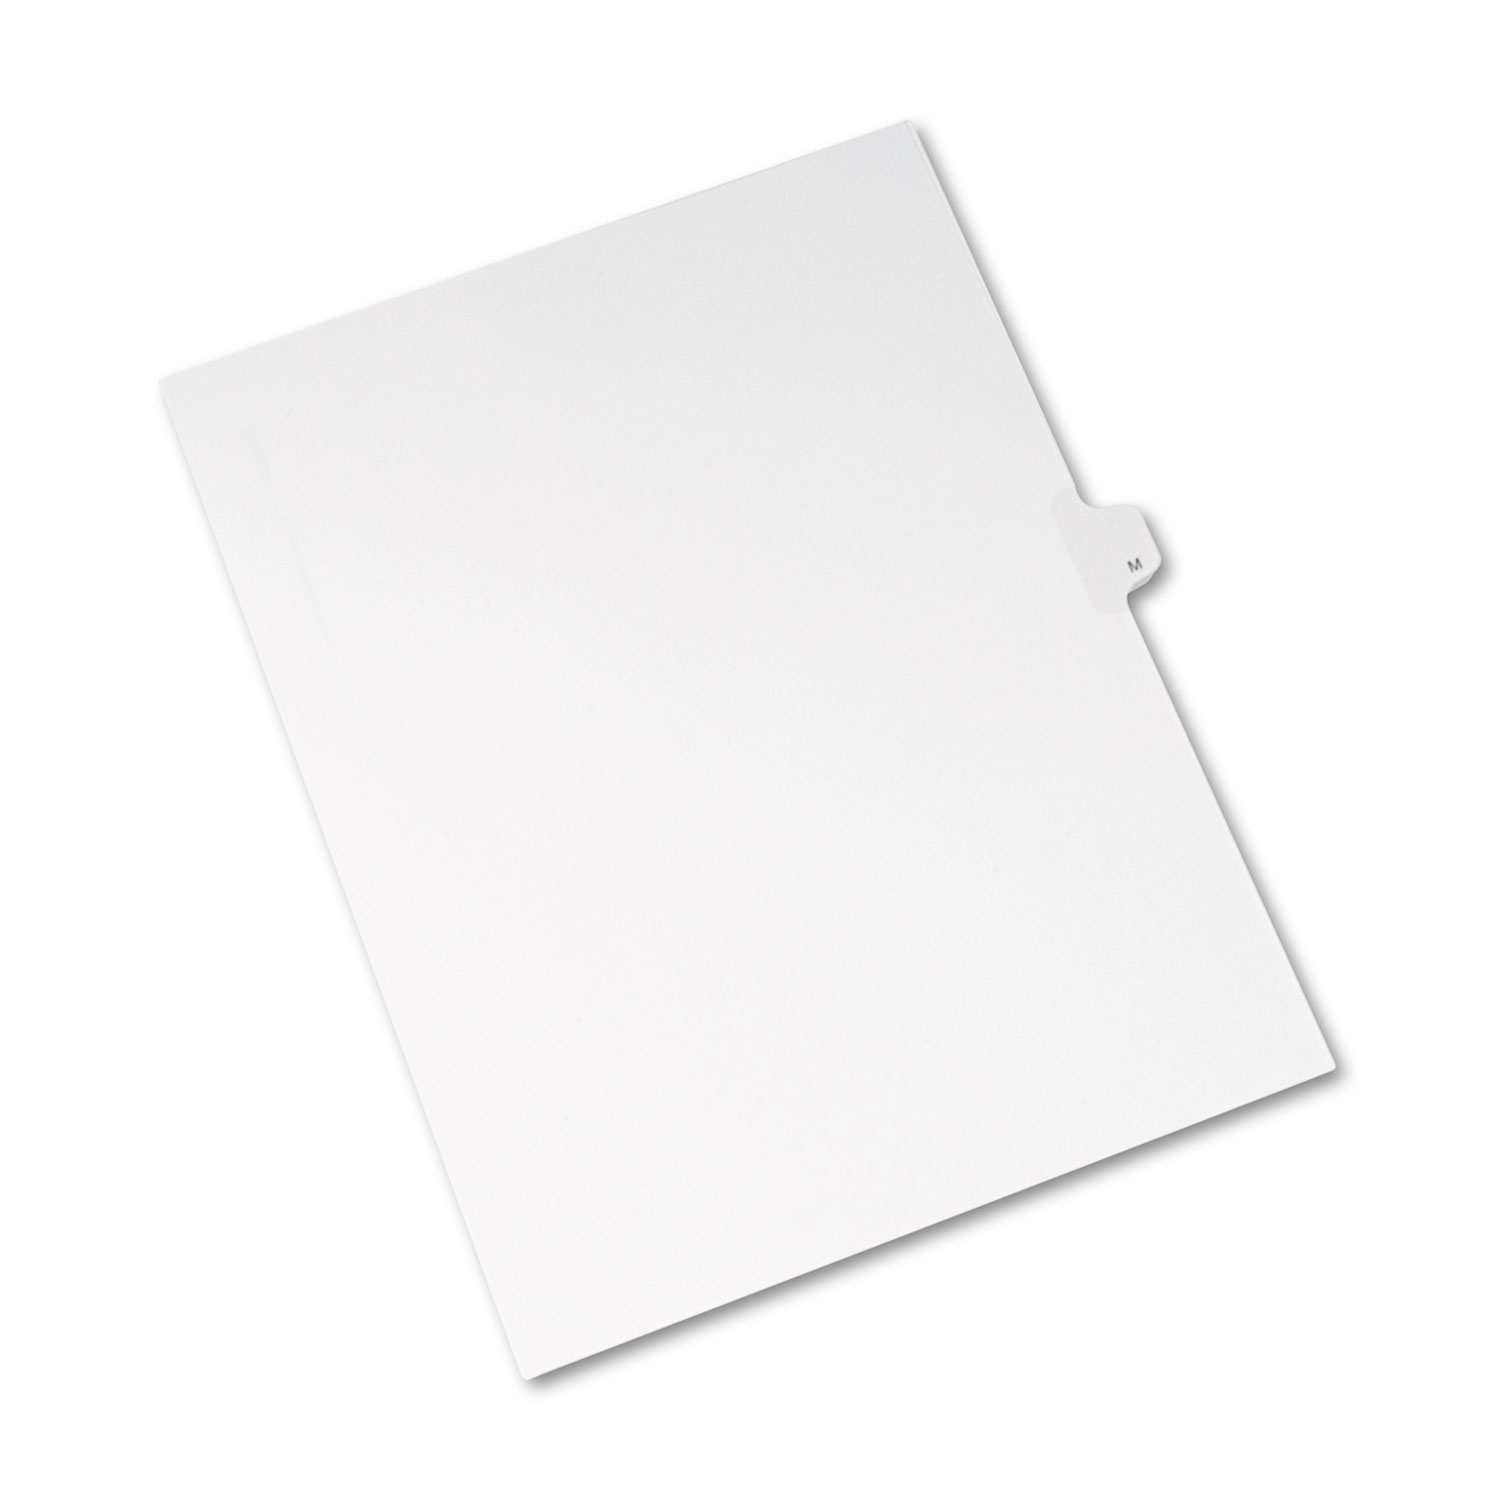 Allstate-Style Legal Exhibit Side Tab Divider, Title: M, Letter, White, 25/Pack